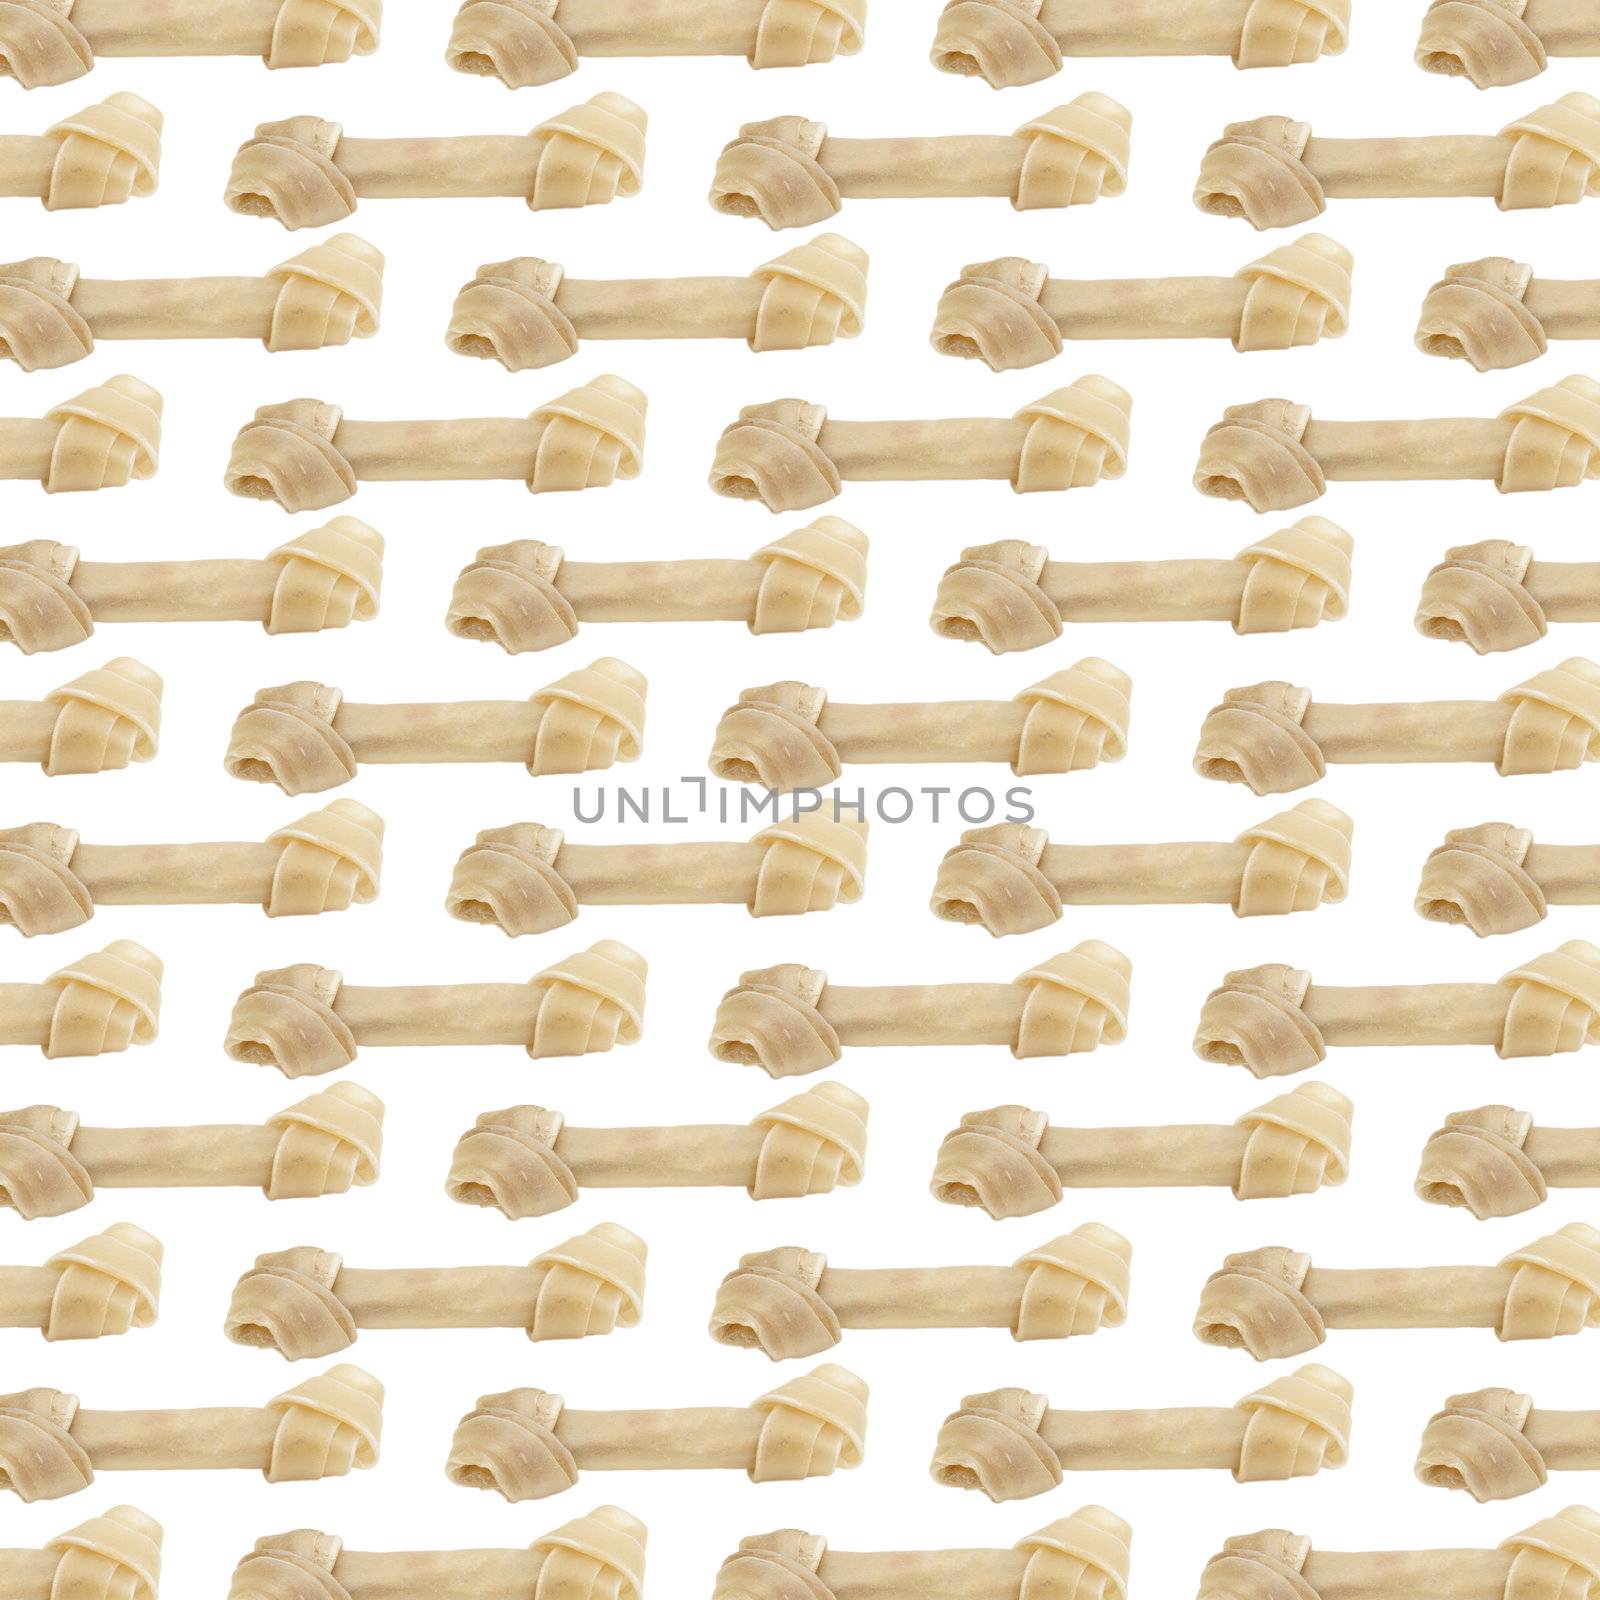 A wallpaper background made of rawhid dog bones.